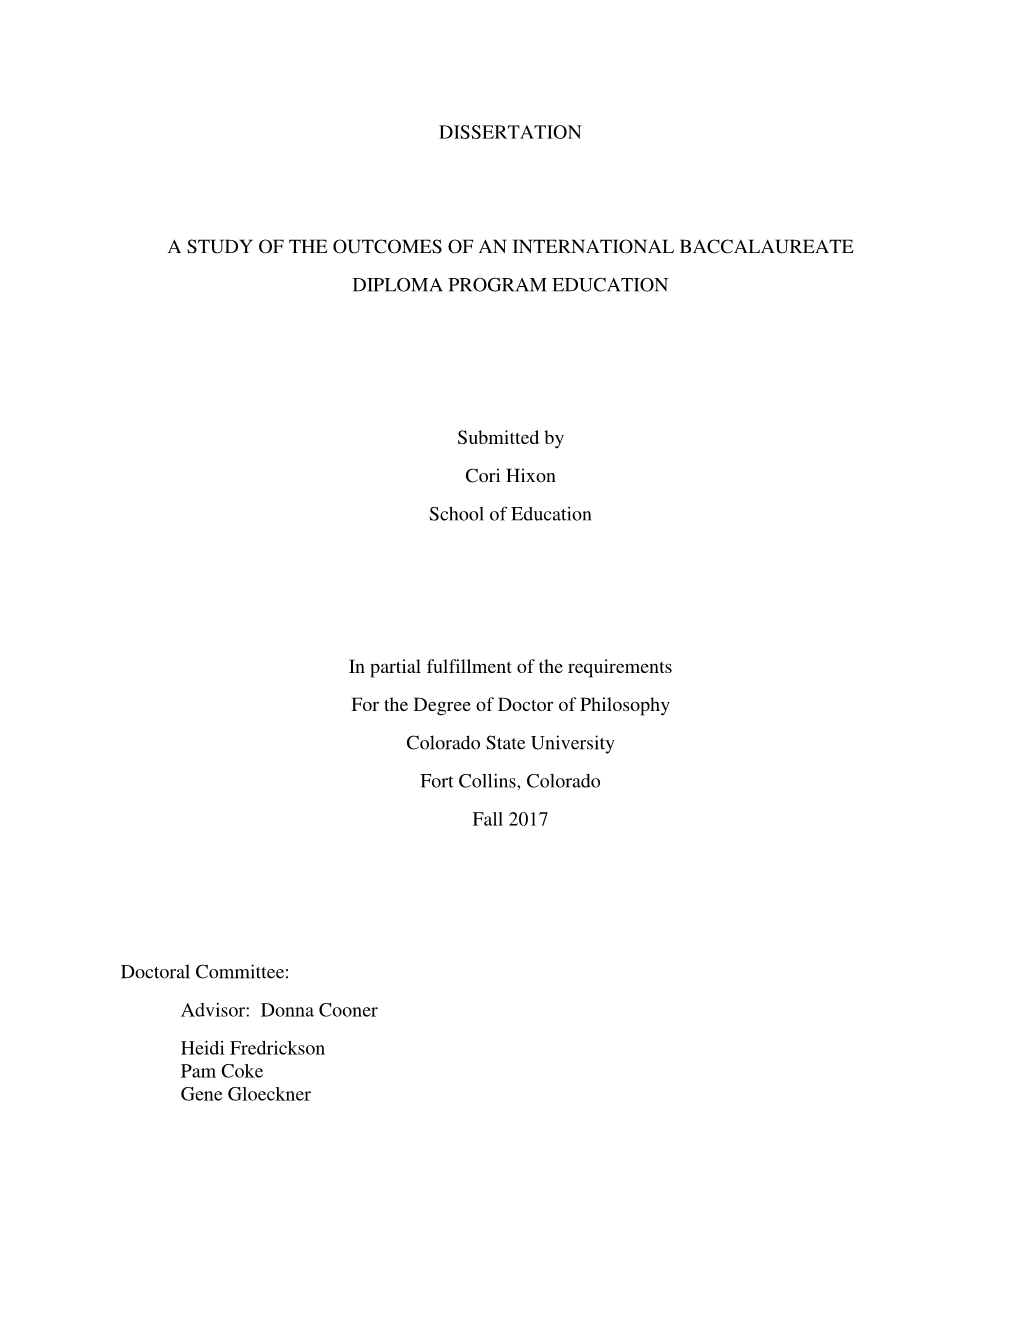 DISSERTATION a STUDY of the OUTCOMES of an INTERNATIONAL BACCALAUREATE DIPLOMA PROGRAM EDUCATION Submitted by Cori Hixon School